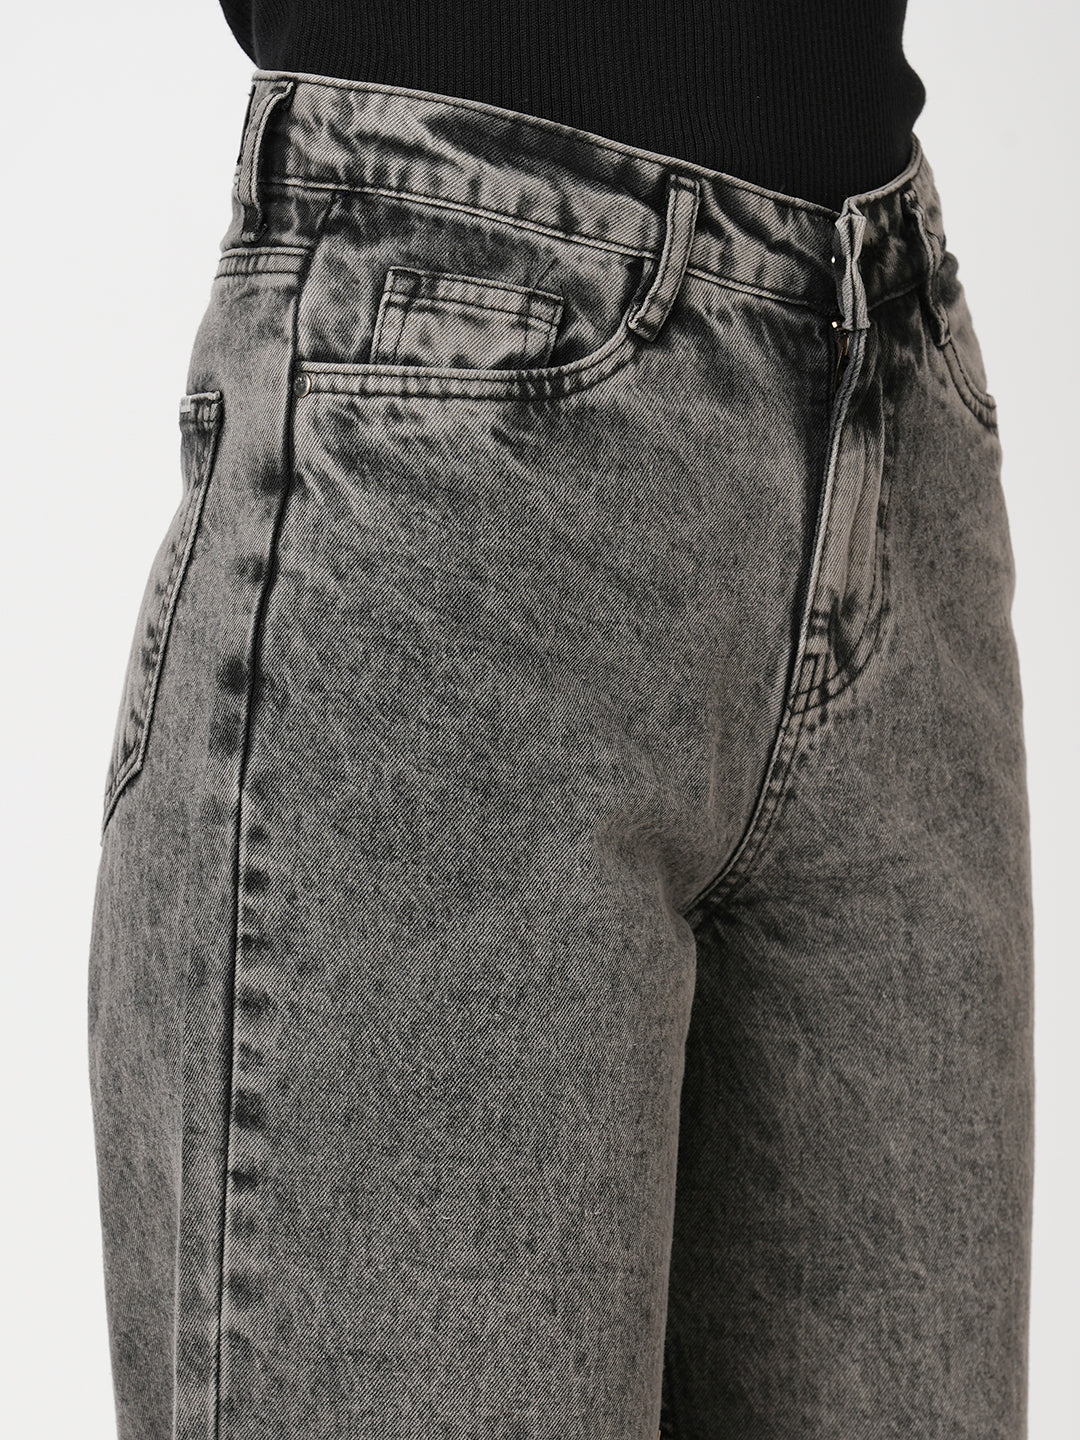 High Rise Baggy Fit Jeans